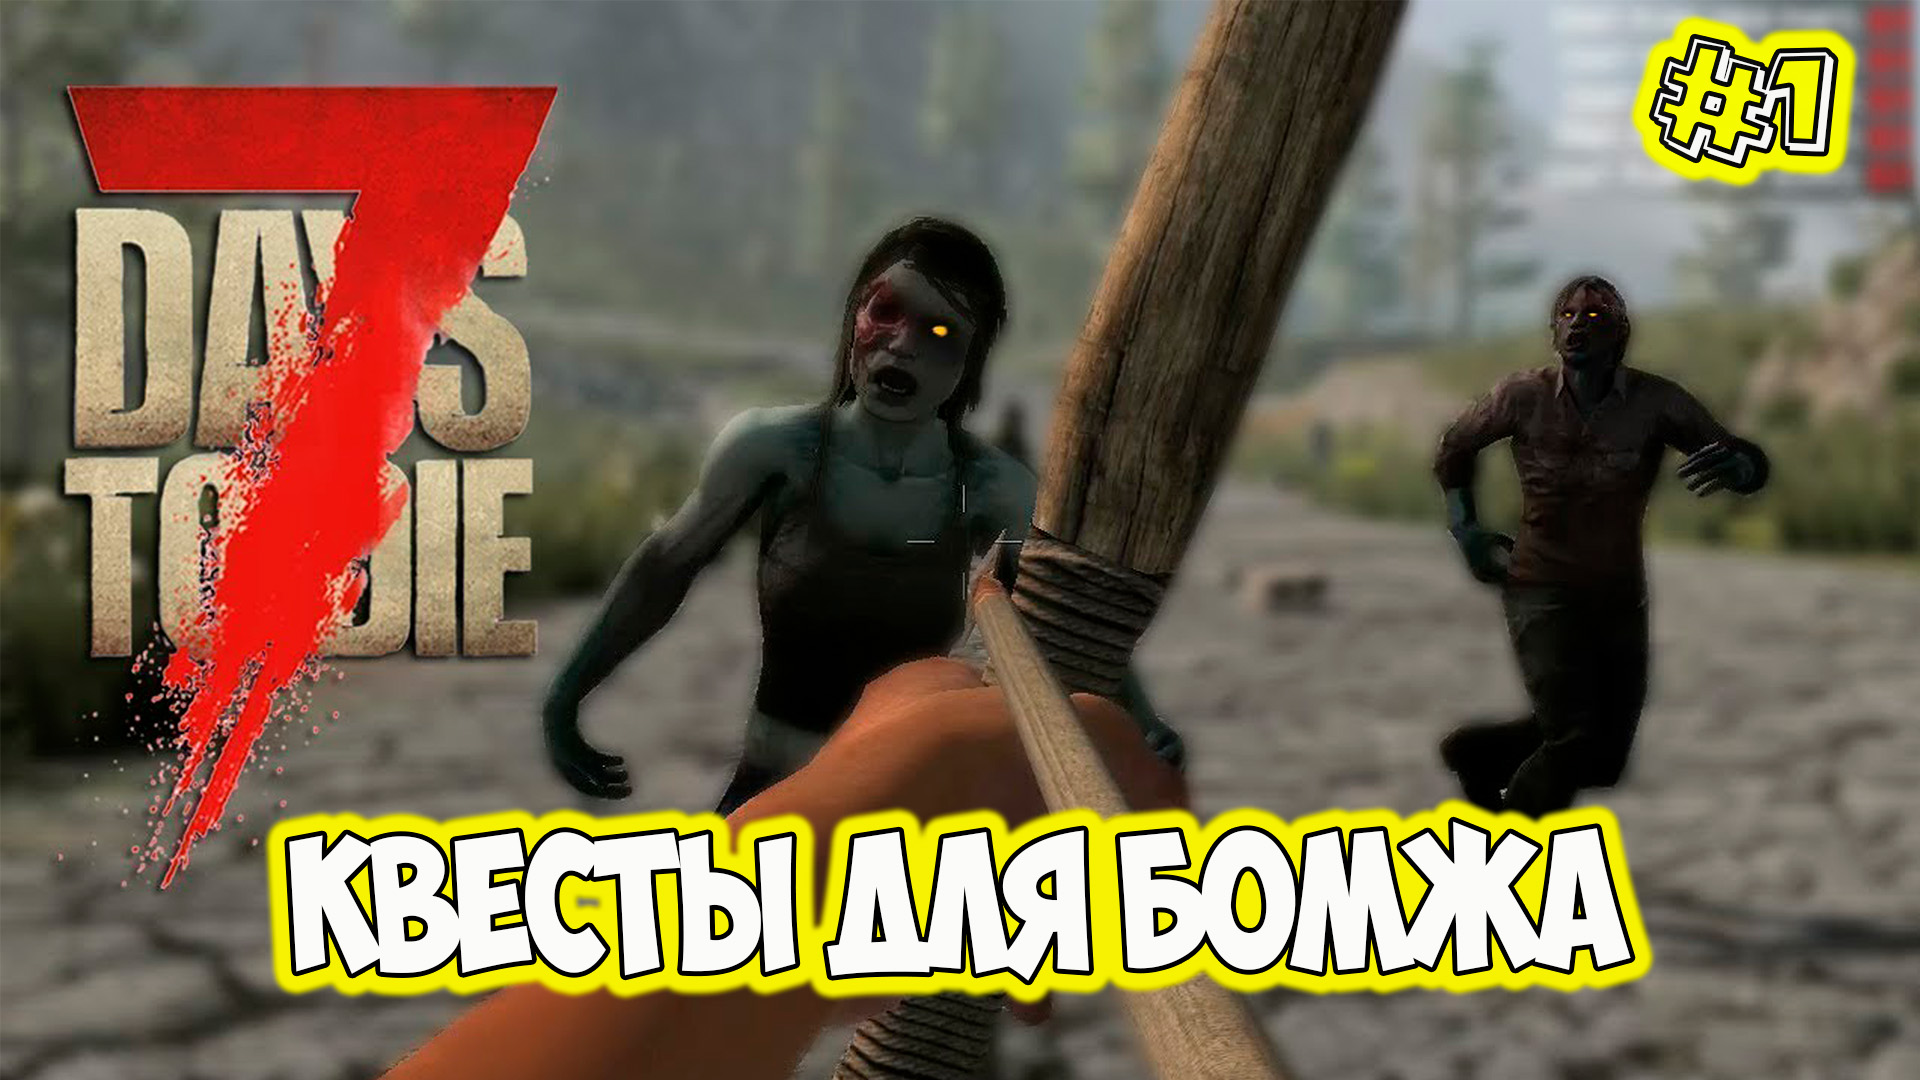 Could not fully initialize steam 7 days to die что делать фото 58